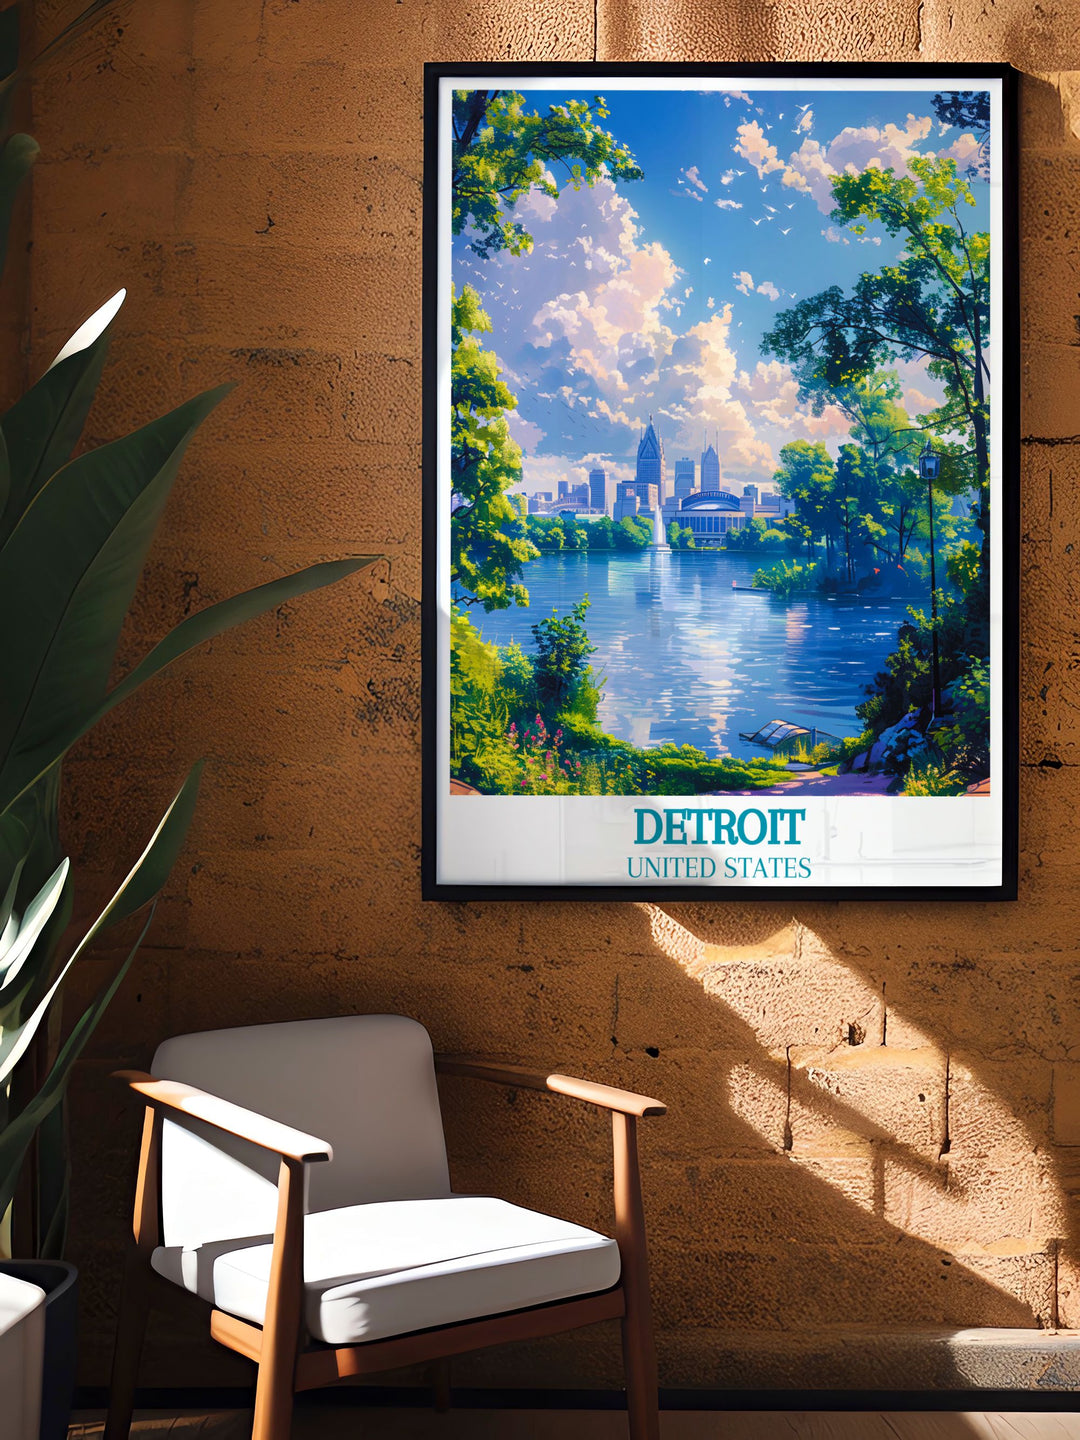 Custom print featuring unique perspectives of Detroit, capturing the dynamic energy and historical significance of Motor City.